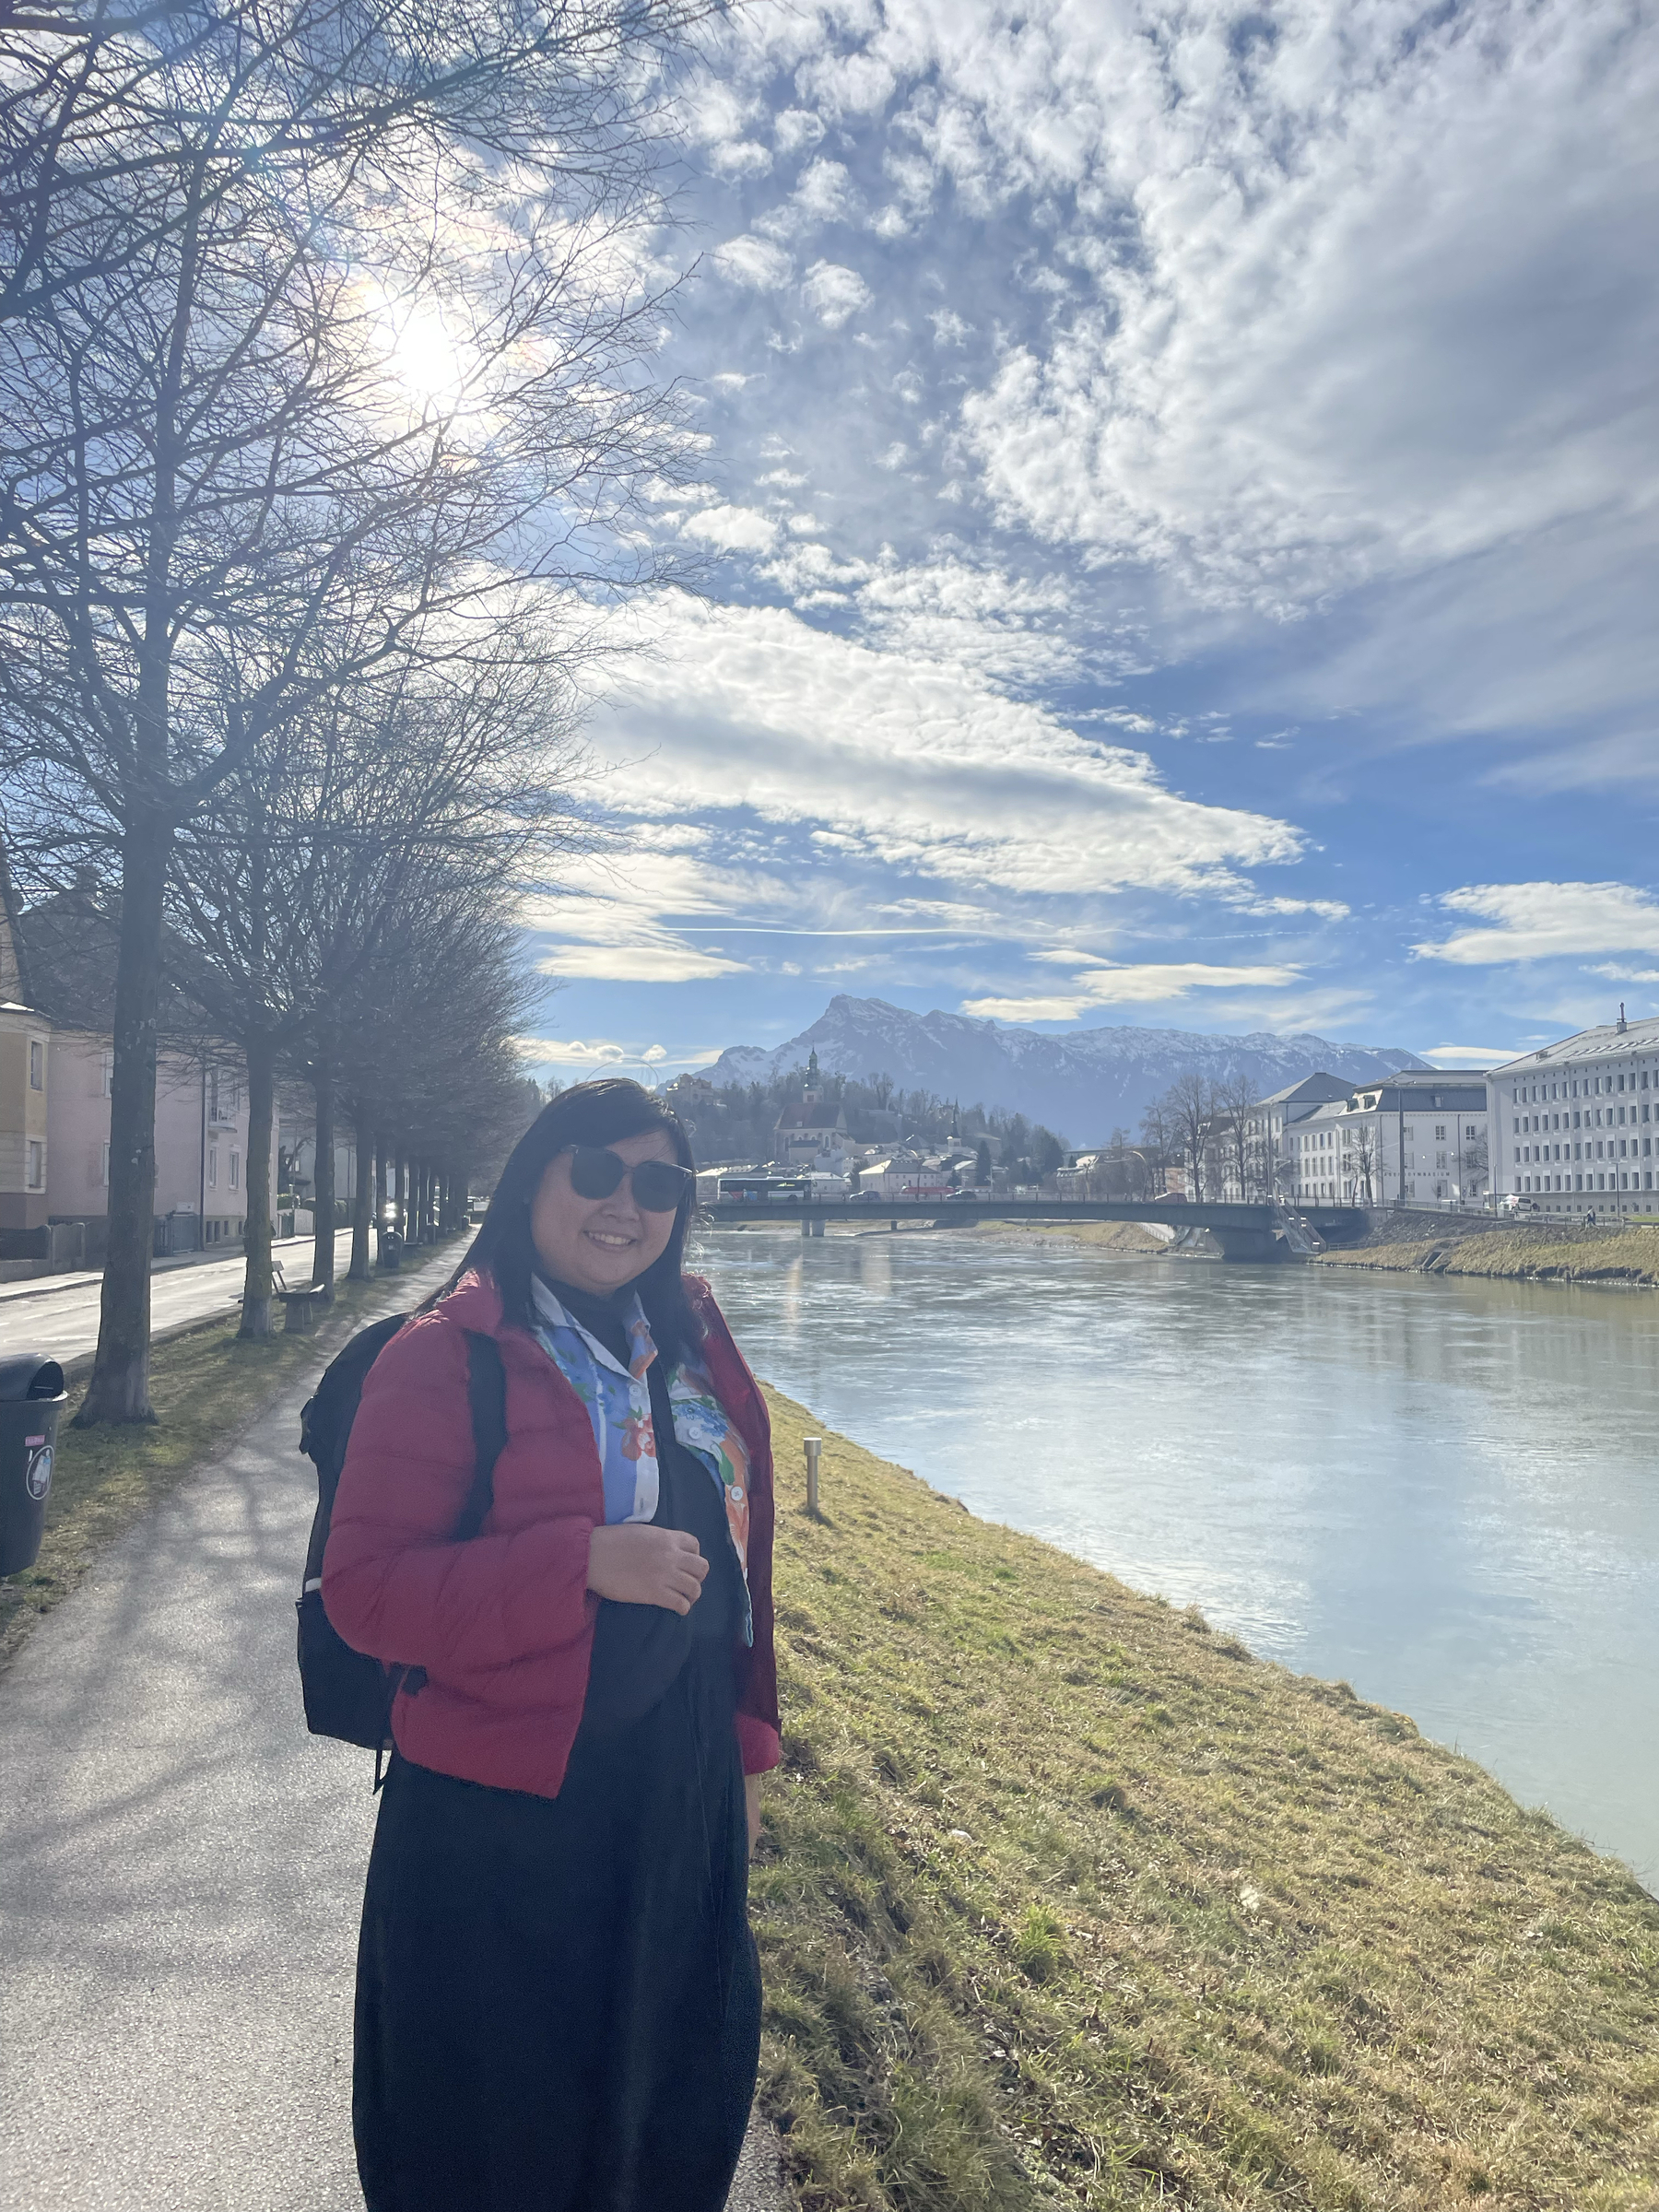 Photo of Chi next to Salzach River. It is a sunny day, with some clouds seen but not blocking the sunlight. Chi is wearing shades, and a red puffer jacket hiding her outfit of a blue crop top that has the pattern of an old blanket from her childhood, a black turtleneck, and a black long skirt. She has her backpack behind her back. A row of leaf-less trees are seen behind her.